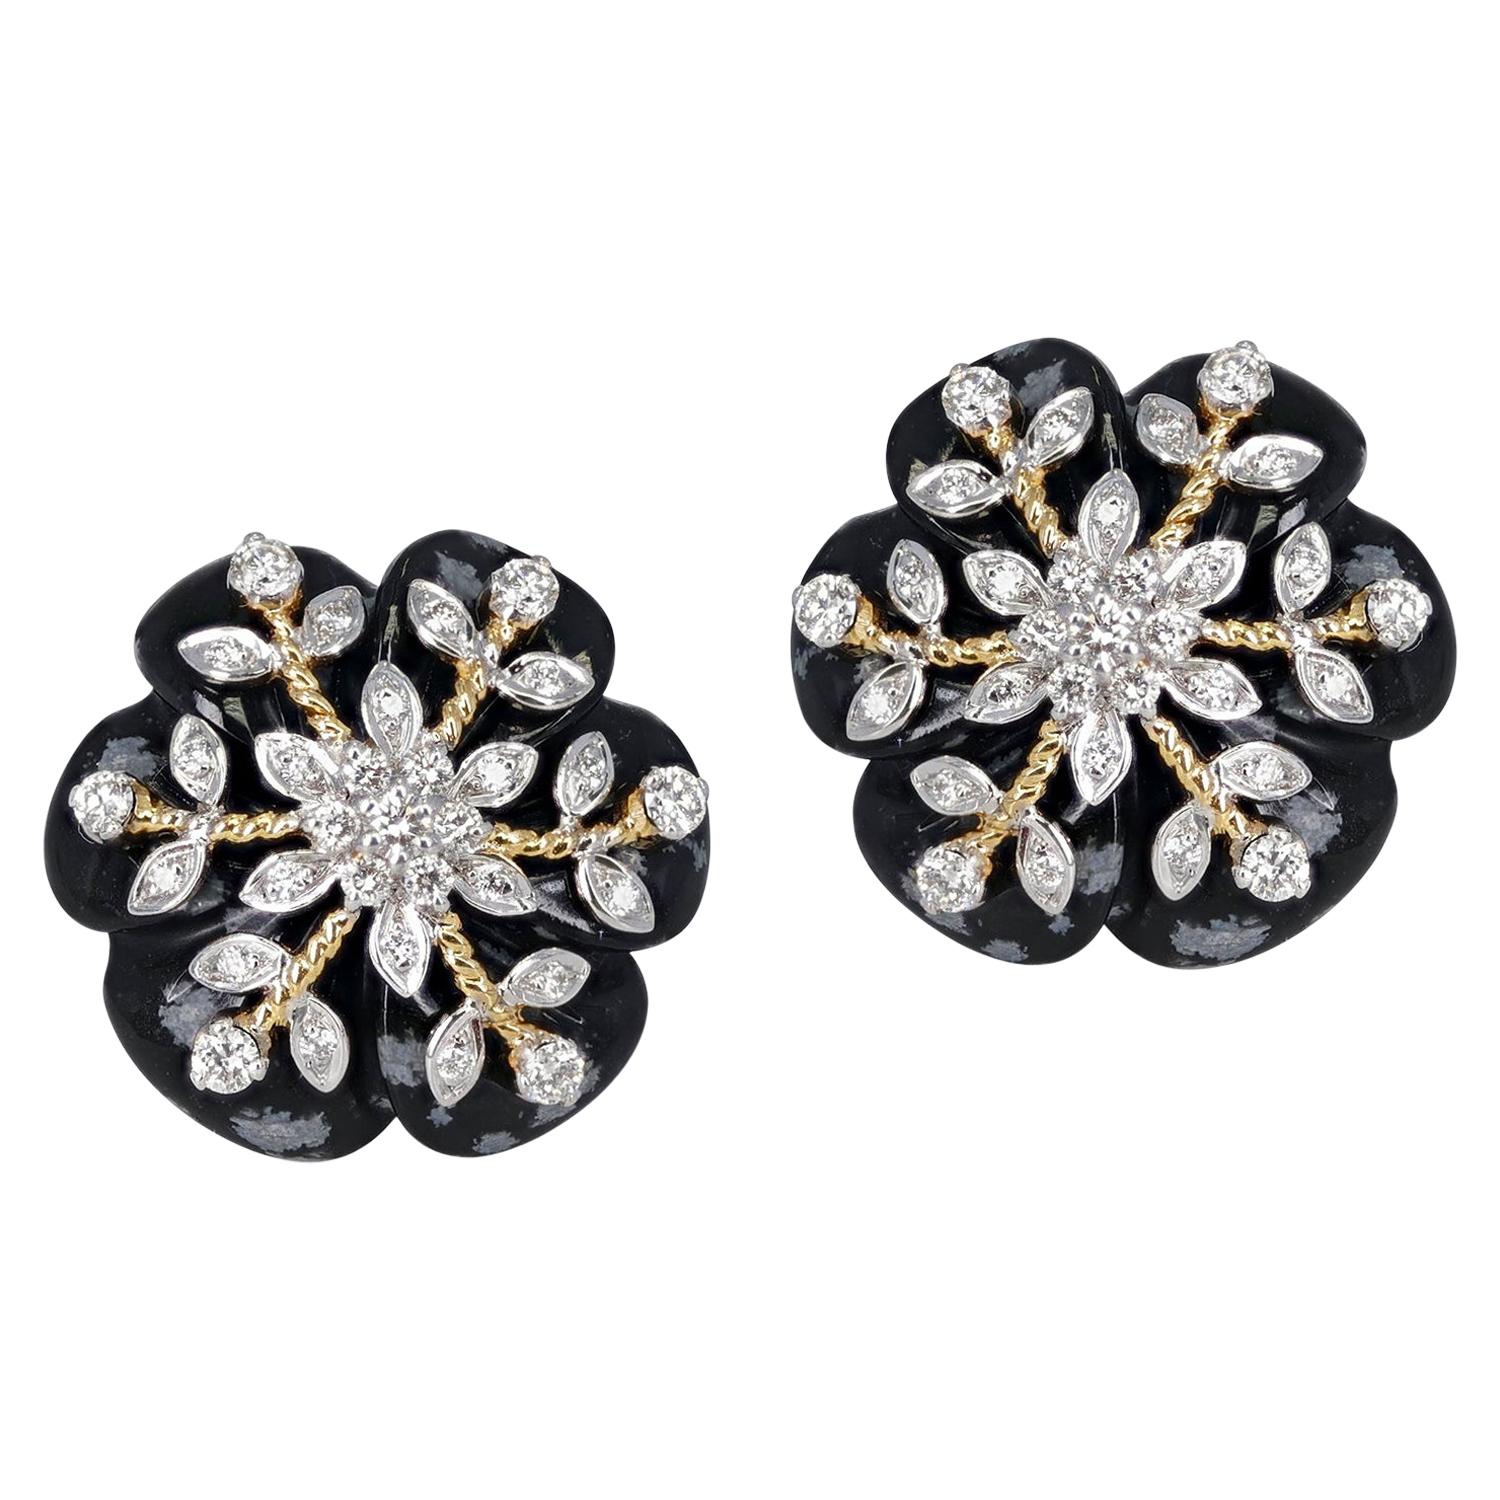 17.20 Ct. Snowflake Obsidian Earrings with 0.64 Ct. Diamonds, 14k For Sale